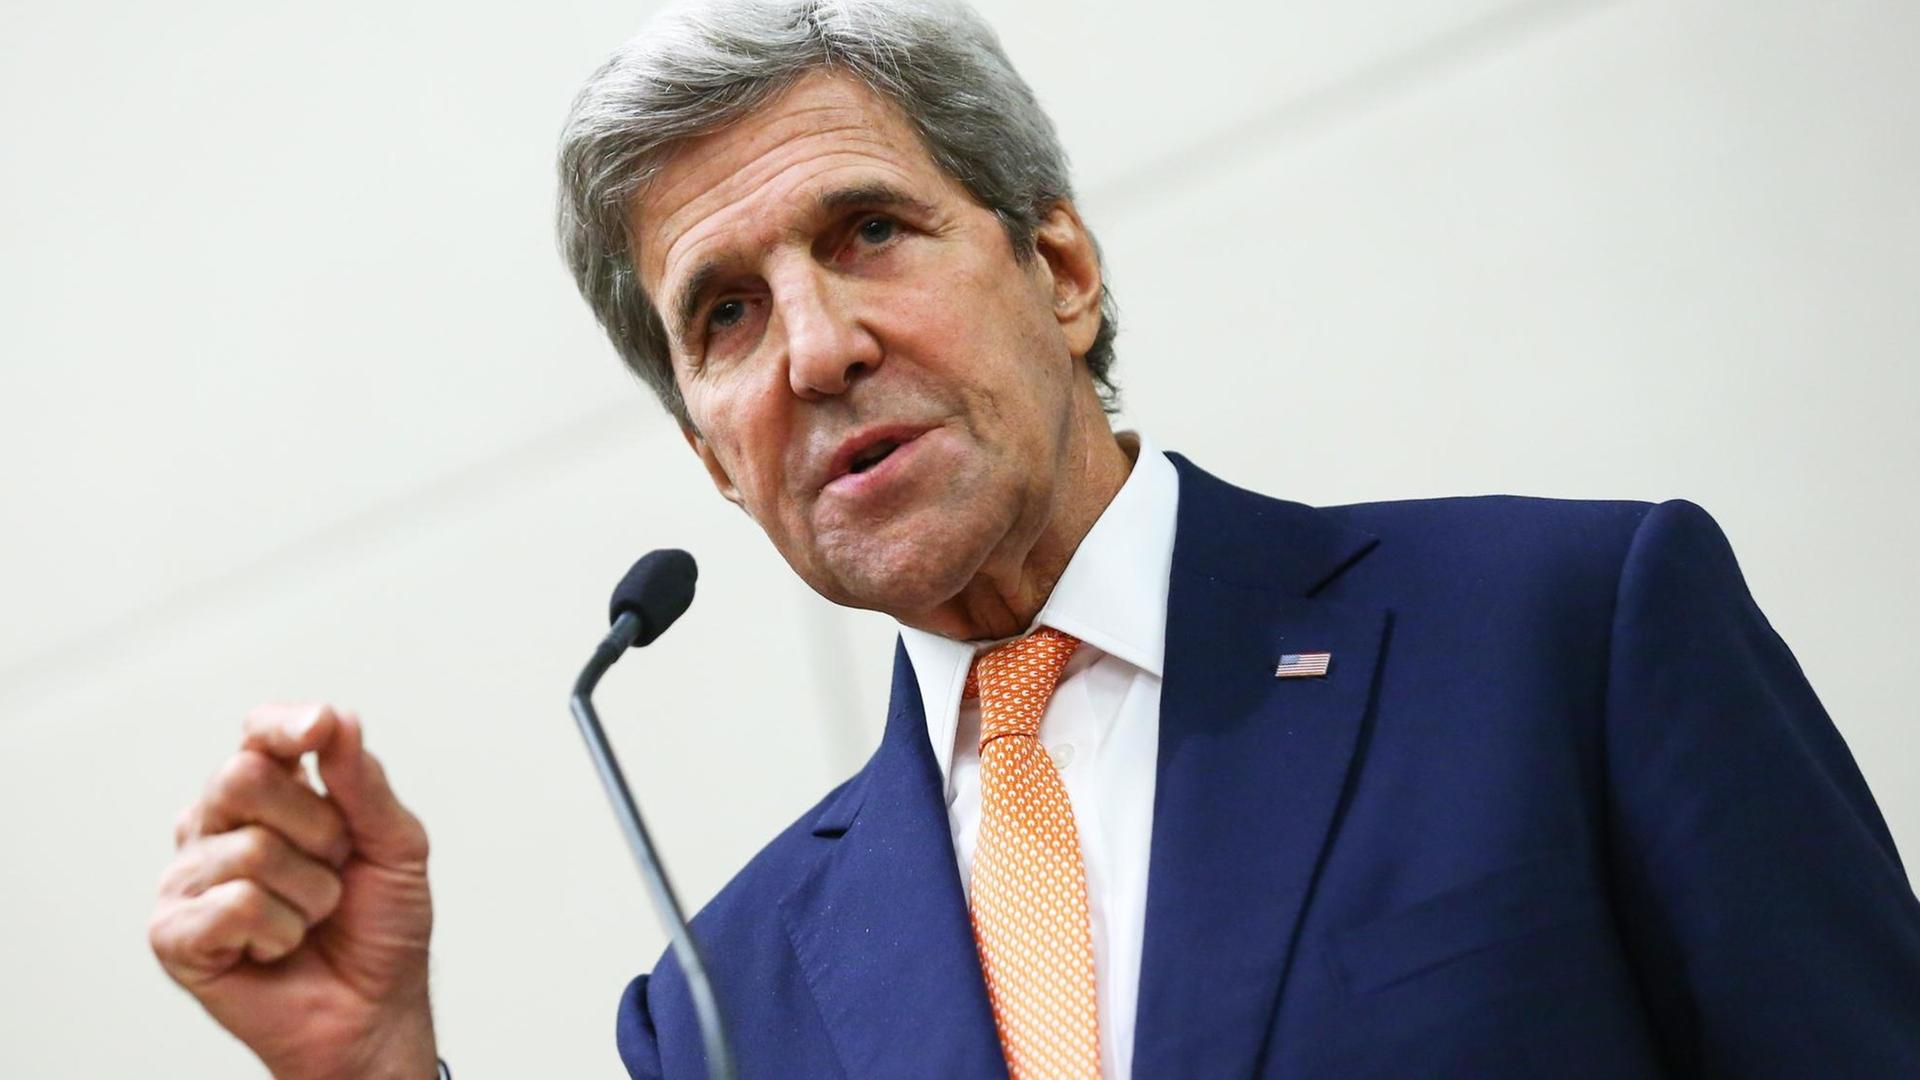 US-Außenminister John Kerry